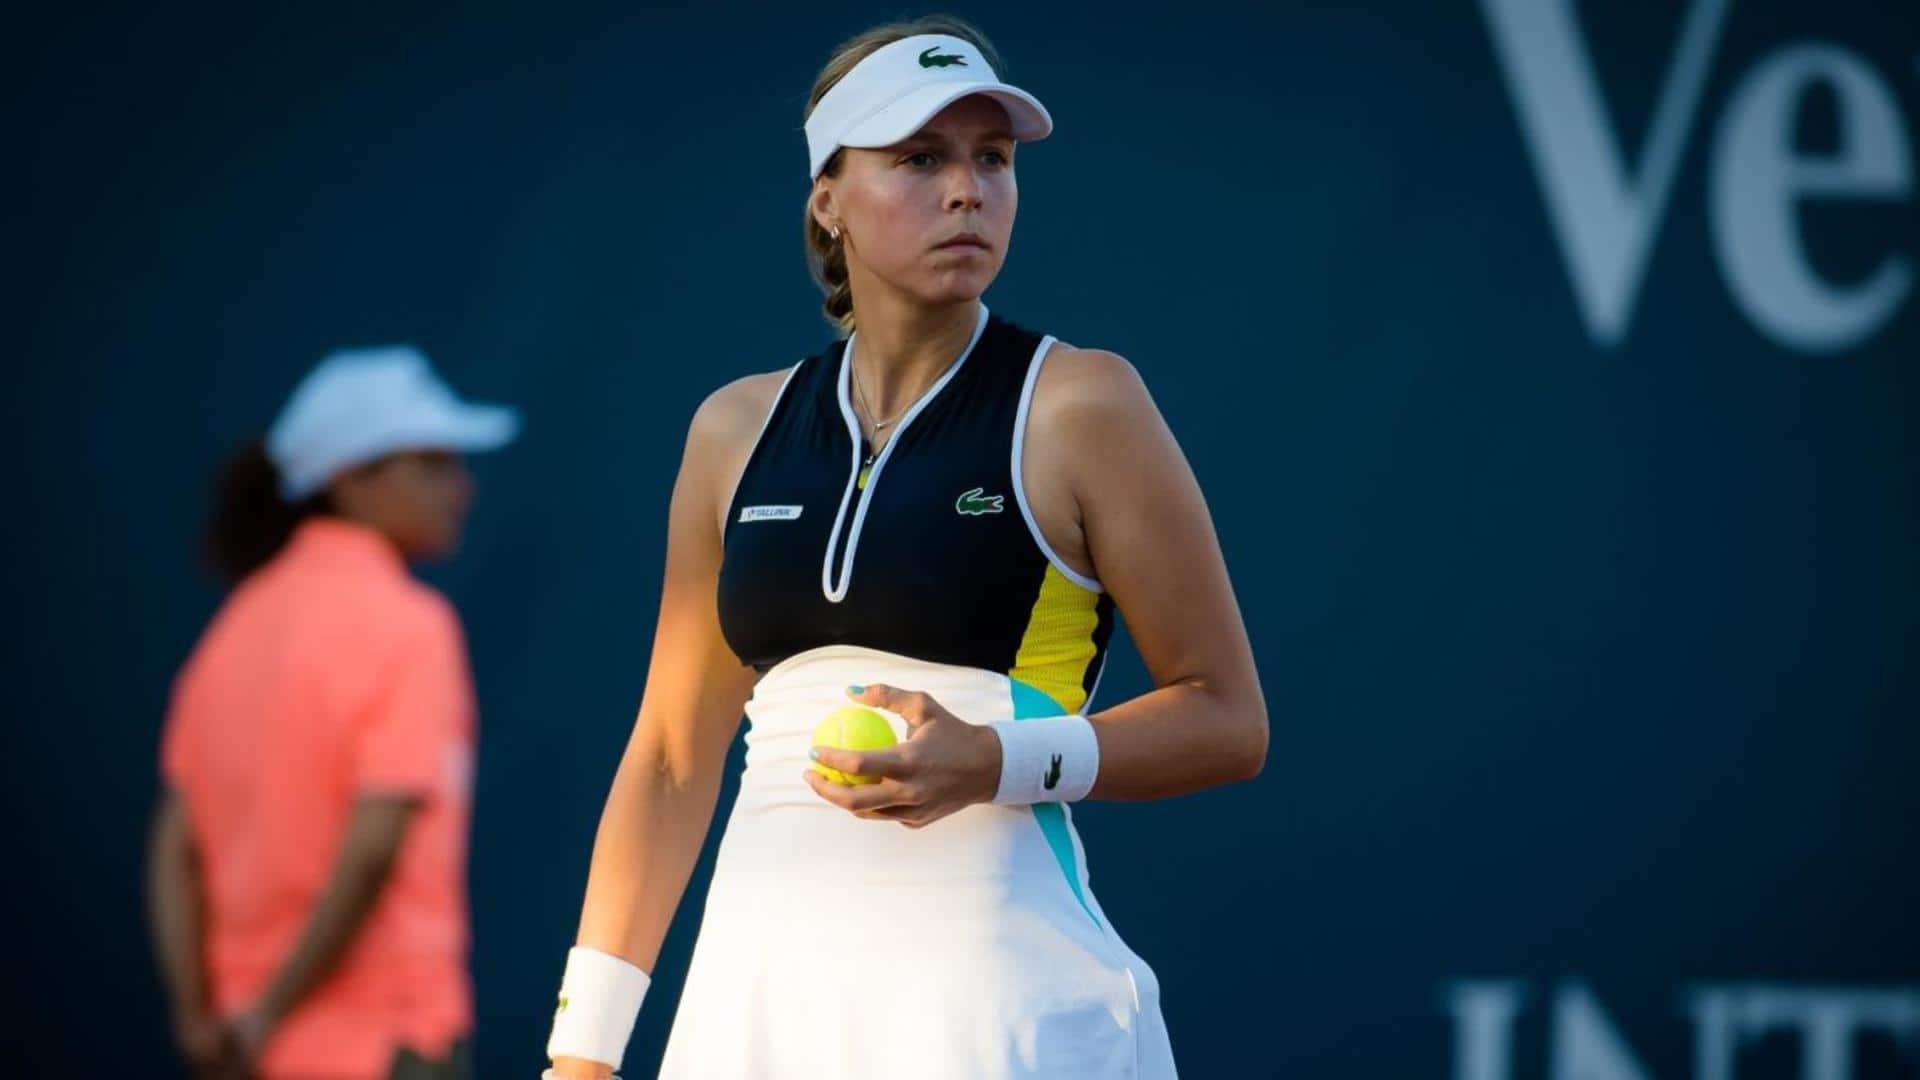 Anett Kontaveit set to retire following Wimbledon: Here's why